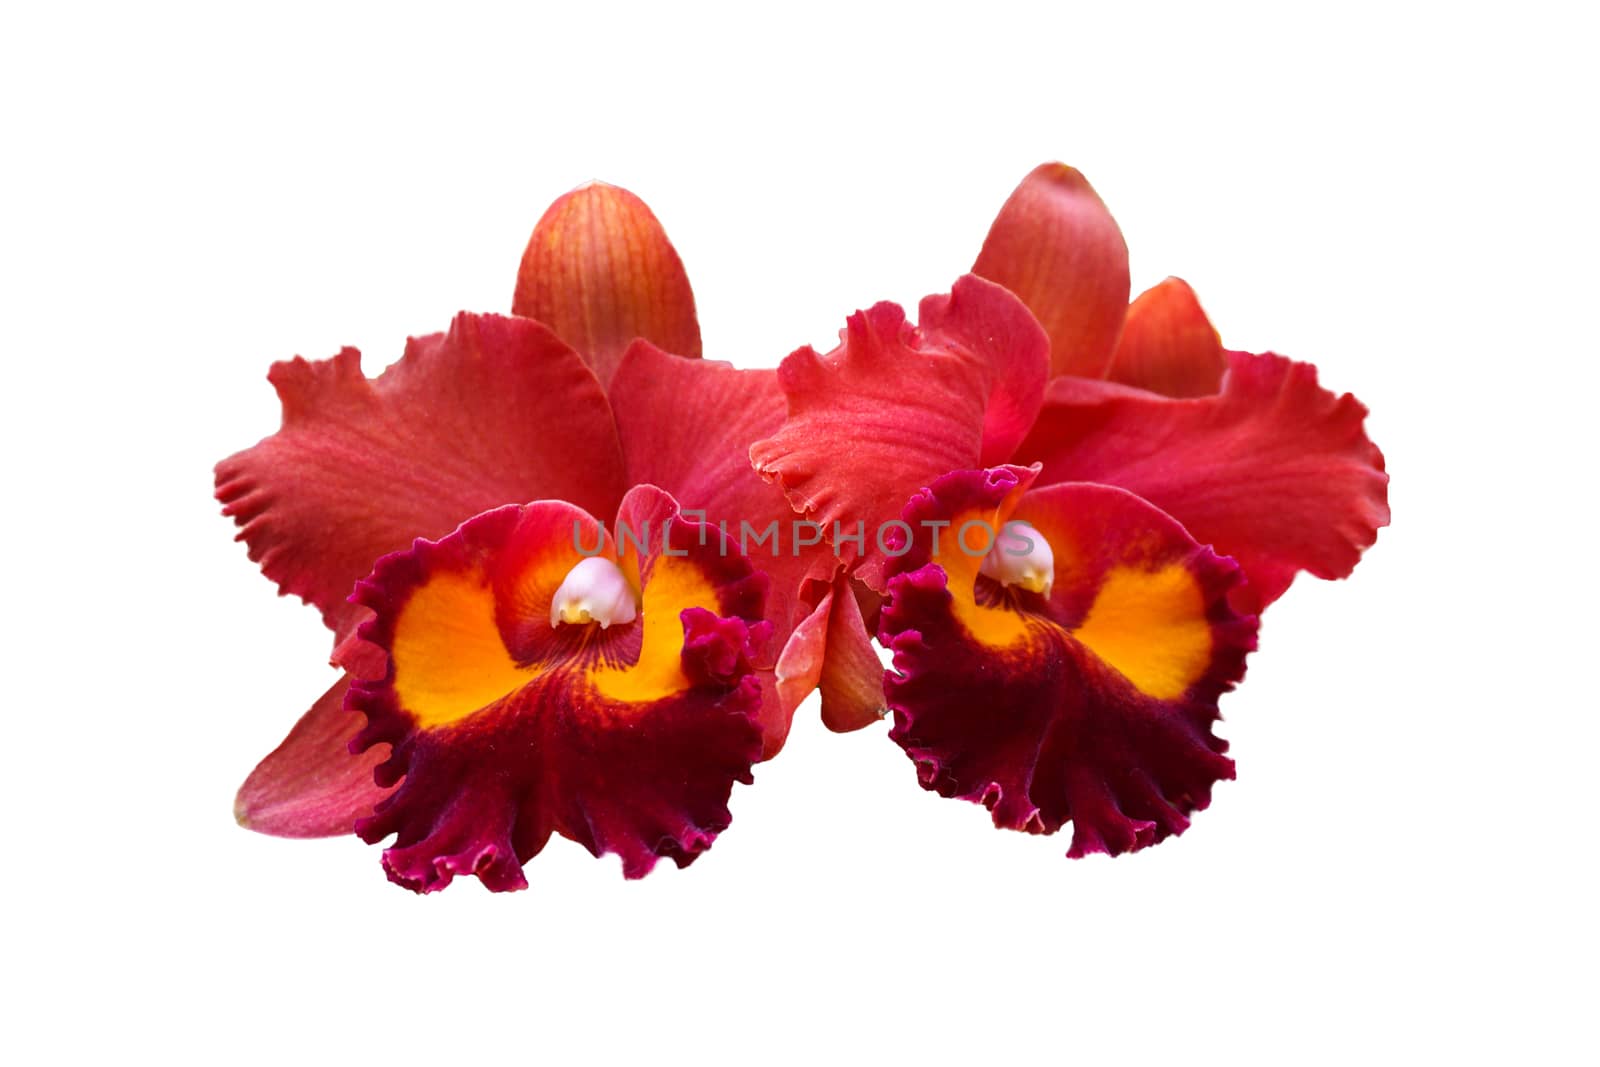 Red orchid flowers isolated on white background with clipping path.